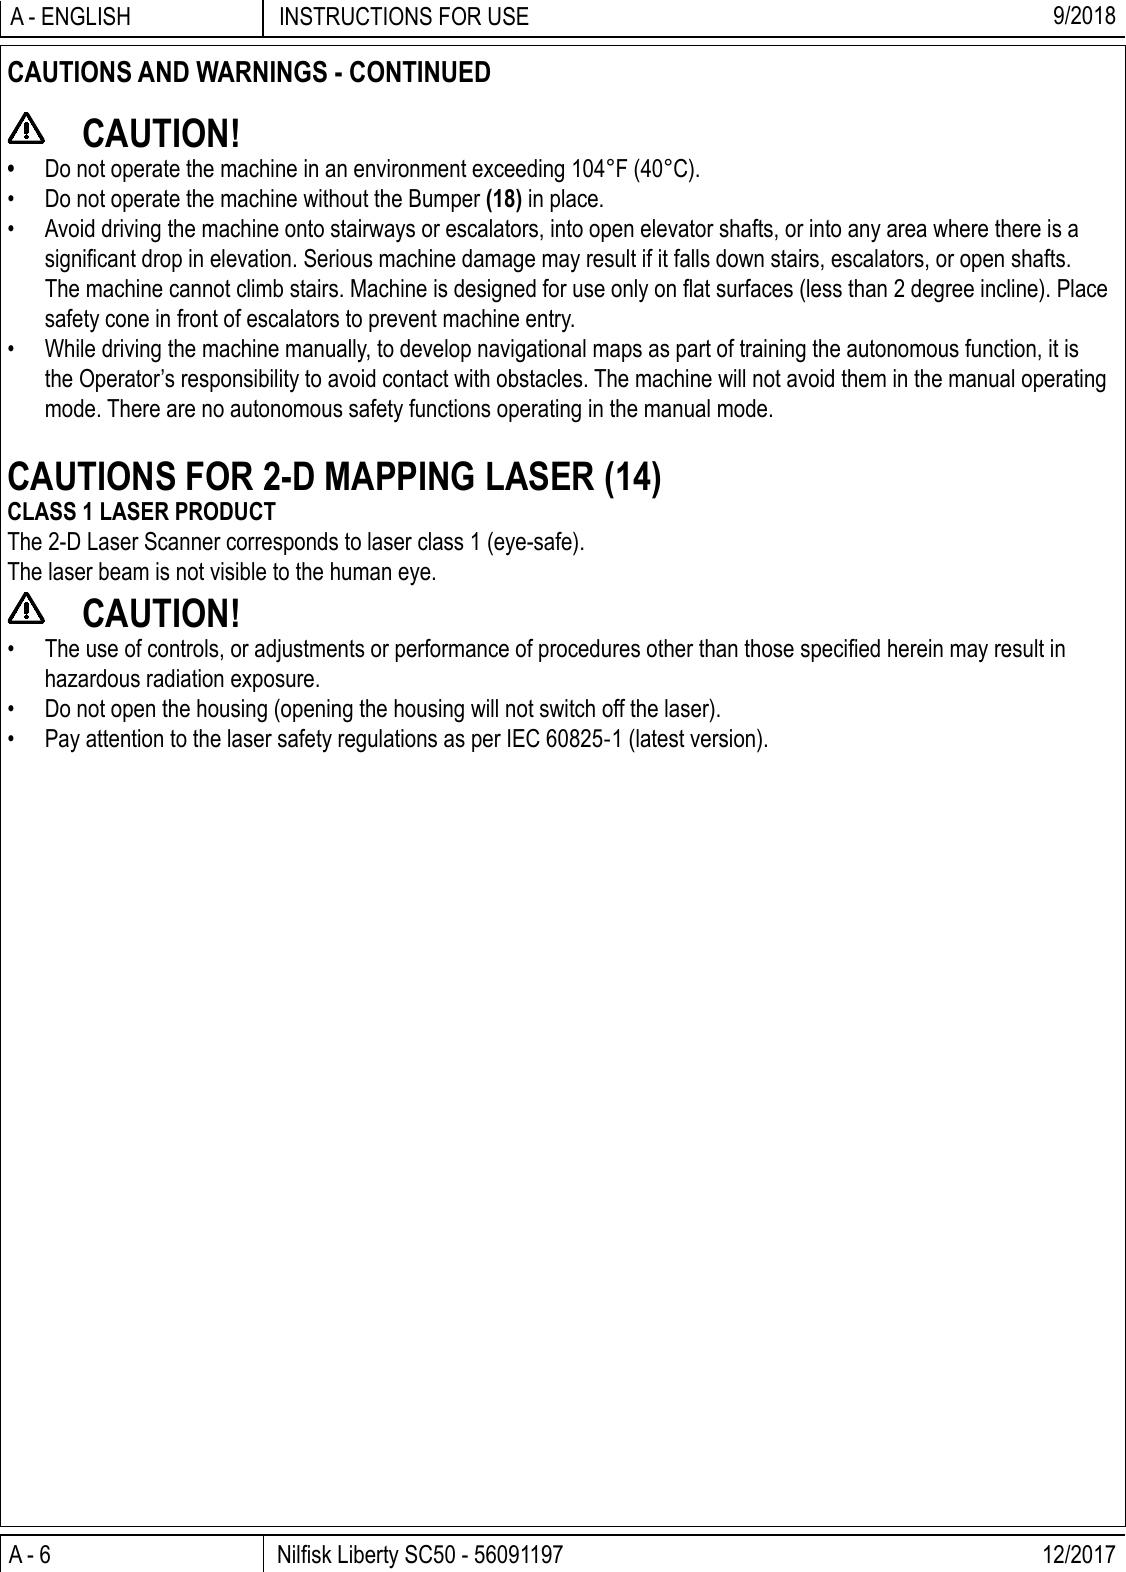 A - 6 Nilﬁ sk Liberty SC50 - 56091197 12/2017INSTRUCTIONS FOR USEA - ENGLISH 9/2018CAUTIONS AND WARNINGS - CONTINUED CAUTION!•  Do not operate the machine in an environment exceeding 104°F (40°C).•  Do not operate the machine without the Bumper (18) in place.•  Avoid driving the machine onto stairways or escalators, into open elevator shafts, or into any area where there is a signiﬁ cant drop in elevation. Serious machine damage may result if it falls down stairs, escalators, or open shafts. The machine cannot climb stairs. Machine is designed for use only on ﬂ at surfaces (less than 2 degree incline). Place safety cone in front of escalators to prevent machine entry.•  While driving the machine manually, to develop navigational maps as part of training the autonomous function, it is the Operator’s responsibility to avoid contact with obstacles. The machine will not avoid them in the manual operating mode. There are no autonomous safety functions operating in the manual mode.CAUTIONS FOR 2-D MAPPING LASER (14)CLASS 1 LASER PRODUCTThe 2-D Laser Scanner corresponds to laser class 1 (eye-safe).The laser beam is not visible to the human eye. CAUTION!•  The use of controls, or adjustments or performance of procedures other than those speciﬁ ed herein may result in hazardous radiation exposure.•  Do not open the housing (opening the housing will not switch off the laser).•  Pay attention to the laser safety regulations as per IEC 60825-1 (latest version).